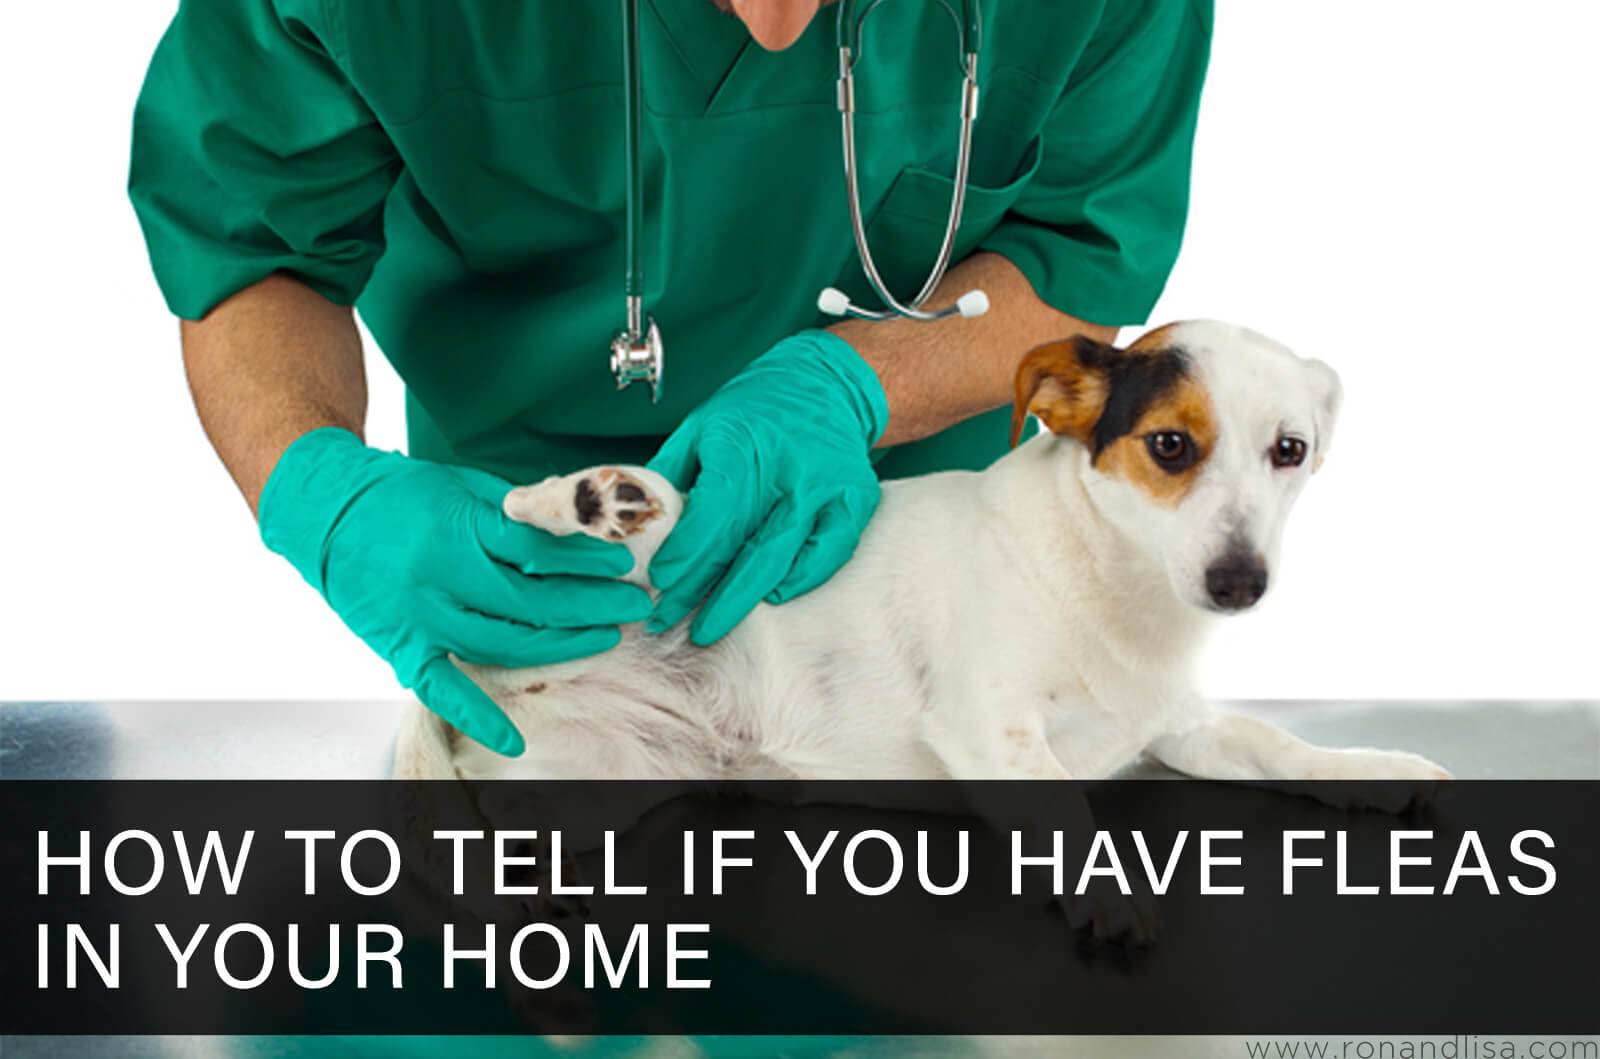 How To Tell If You Have Fleas In Your Home